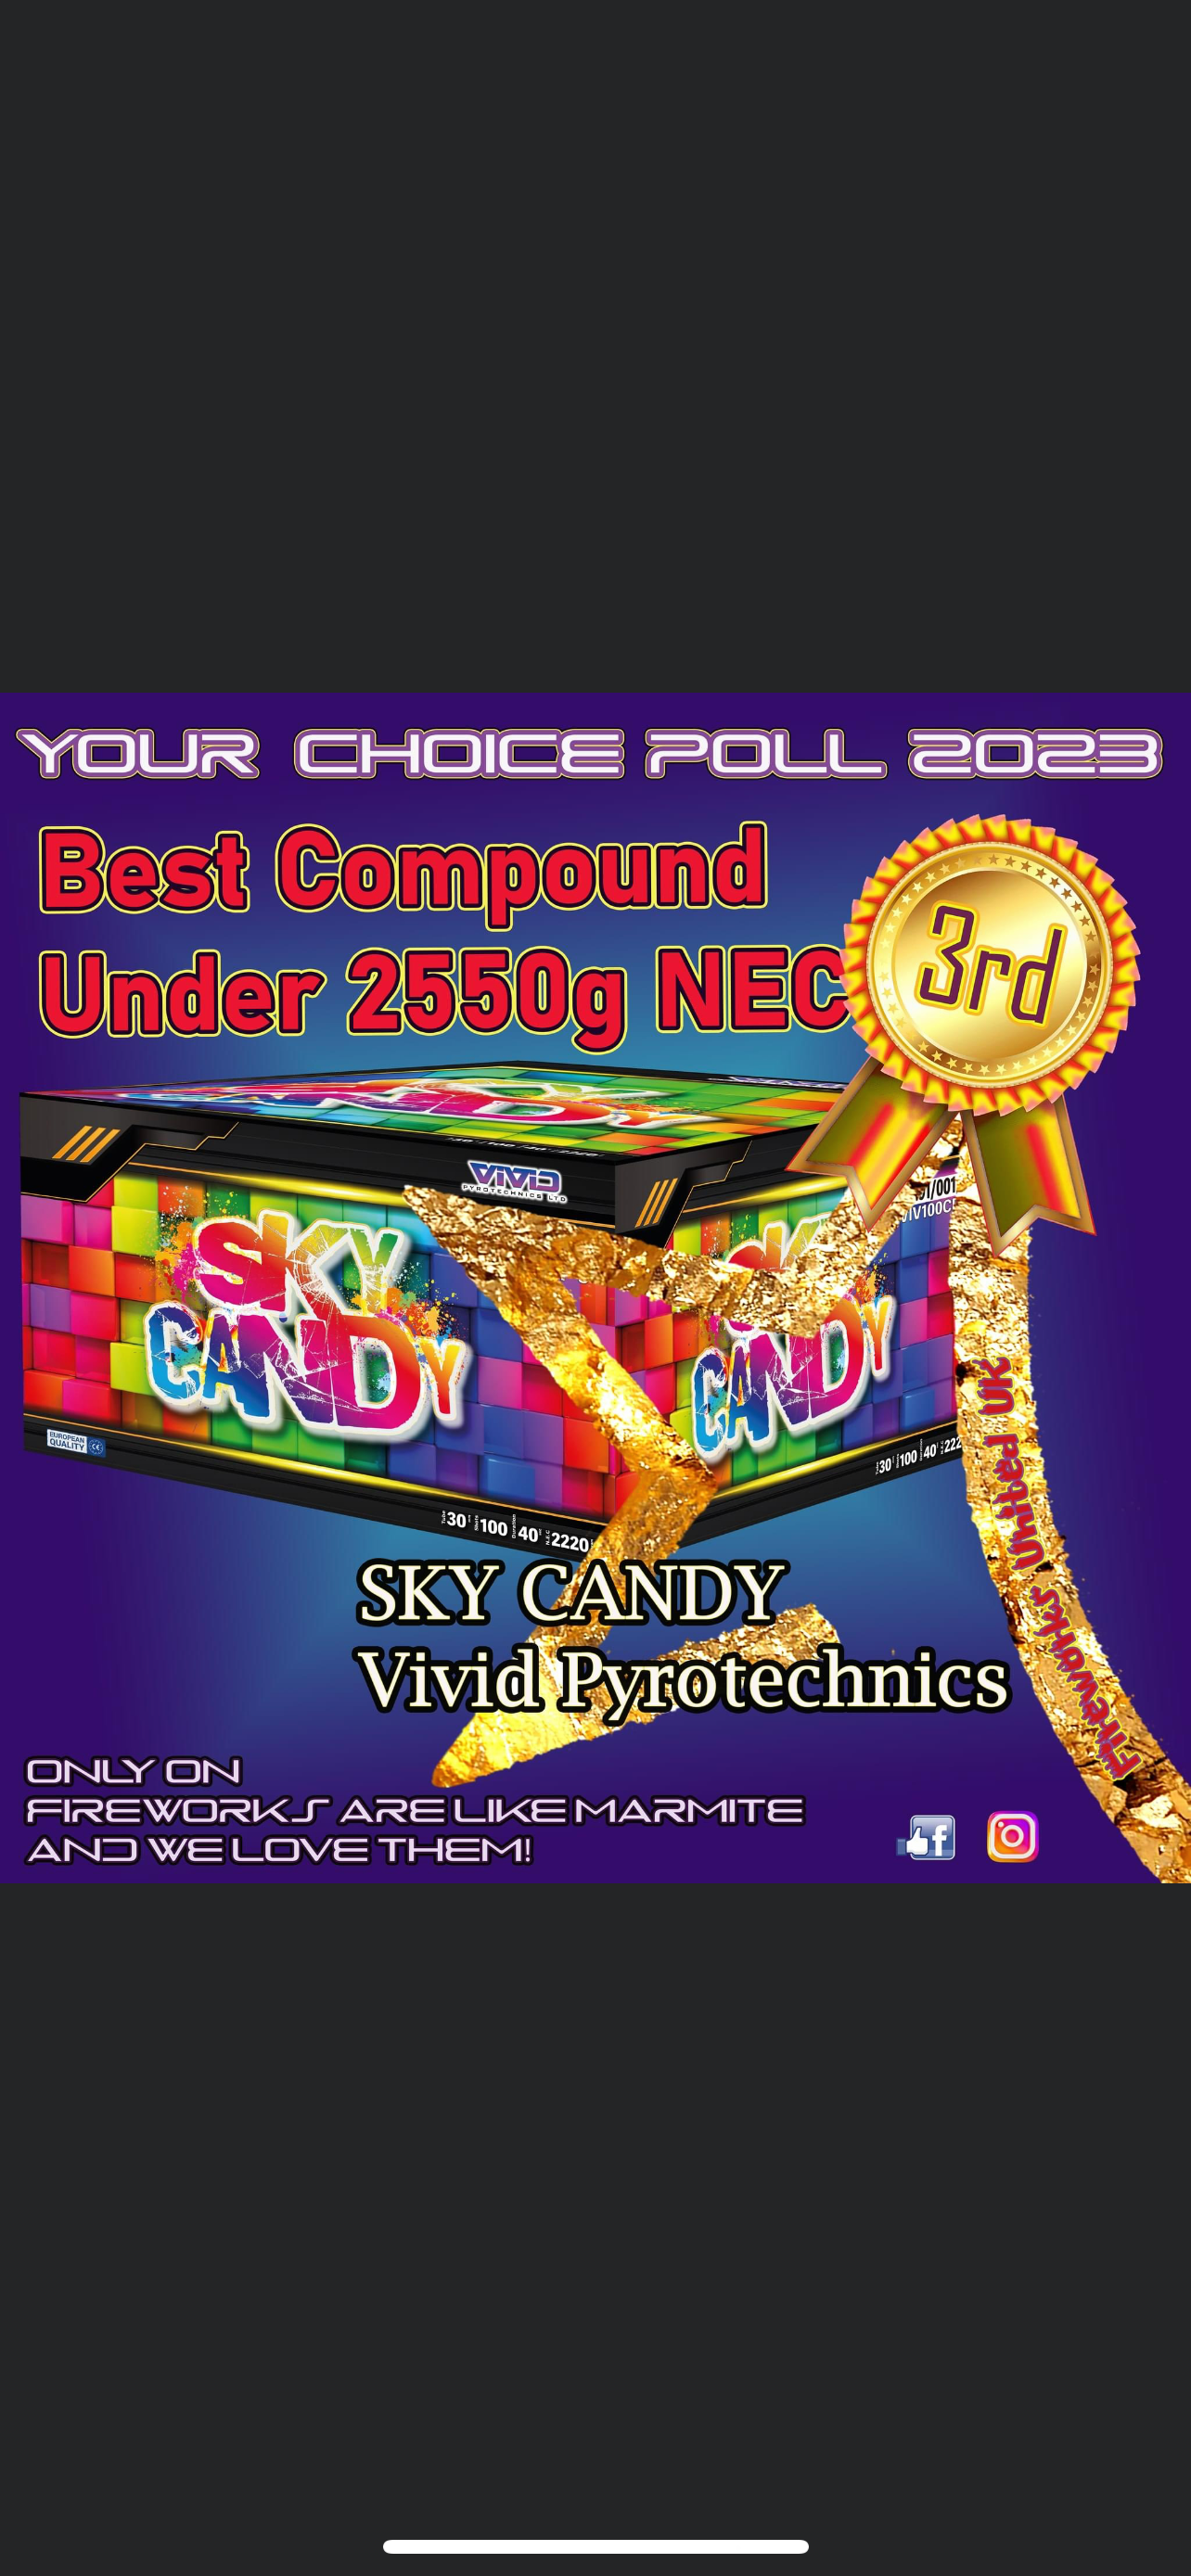 Sky Candy ( Voted Best Compound Firework Under 2550 g Nec 3rd Place